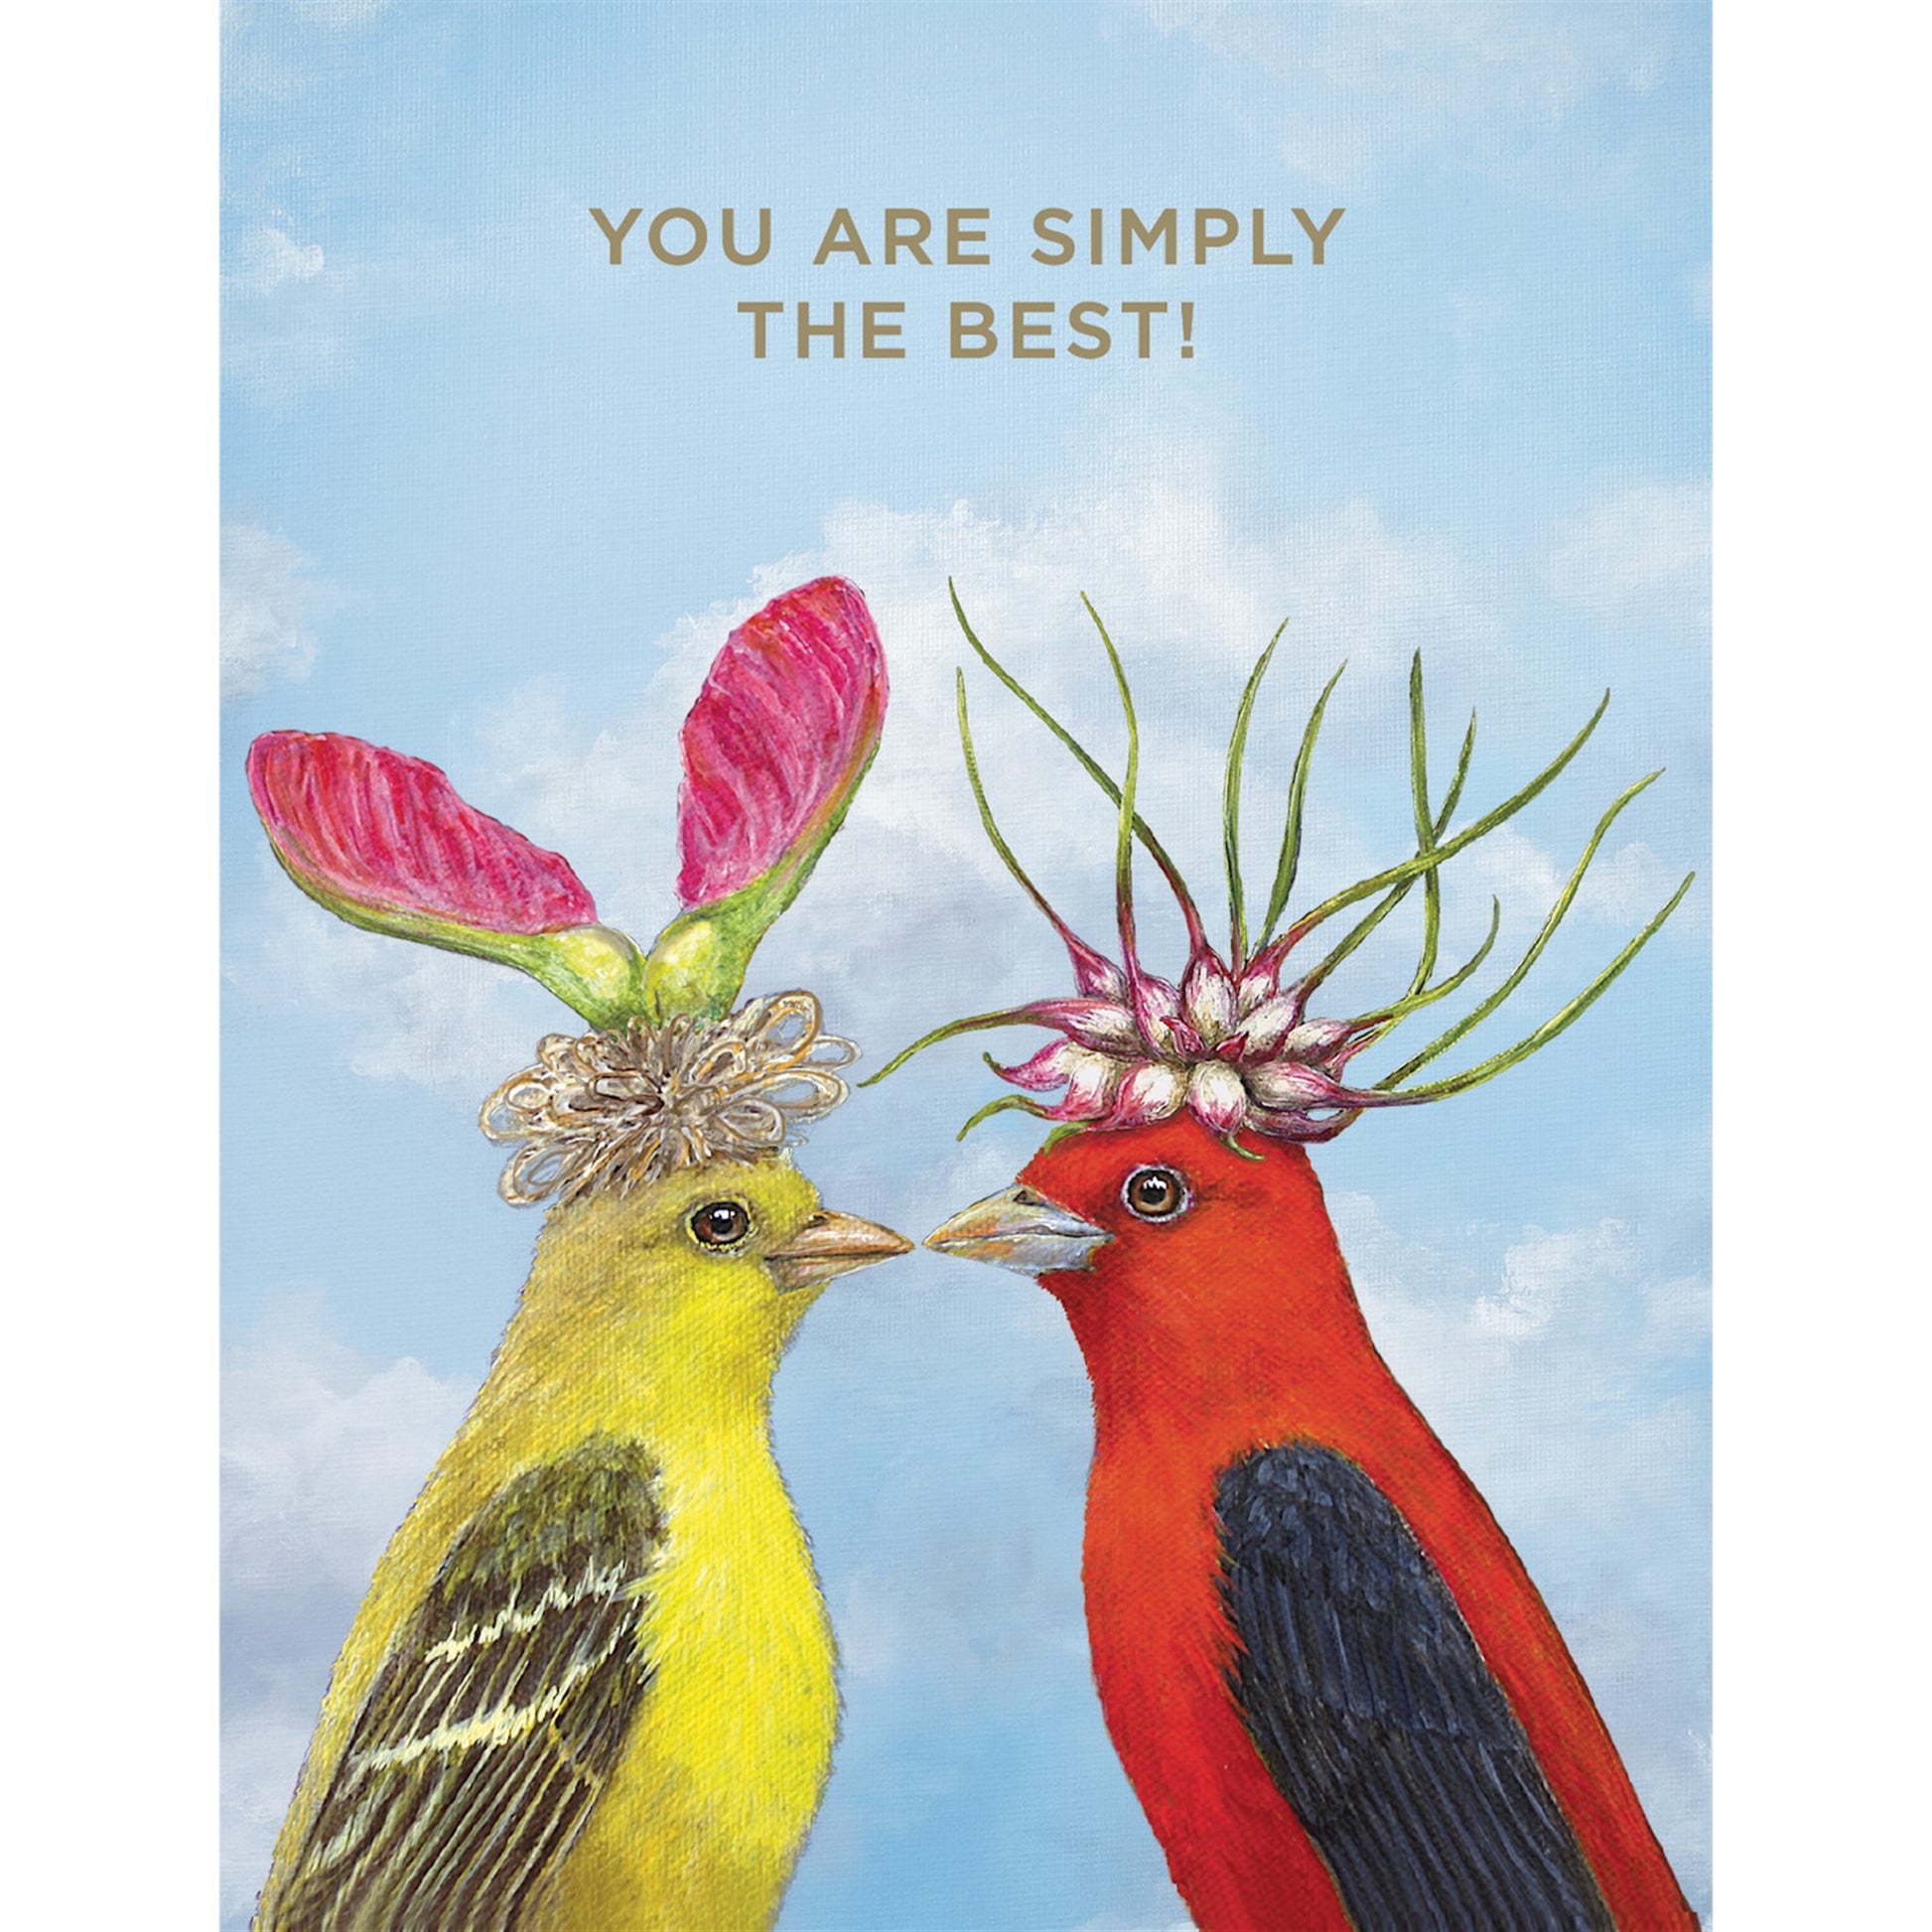 A male and female Cardinals telling each other "you are simply the best" they are wearing lovely seed pod hats 